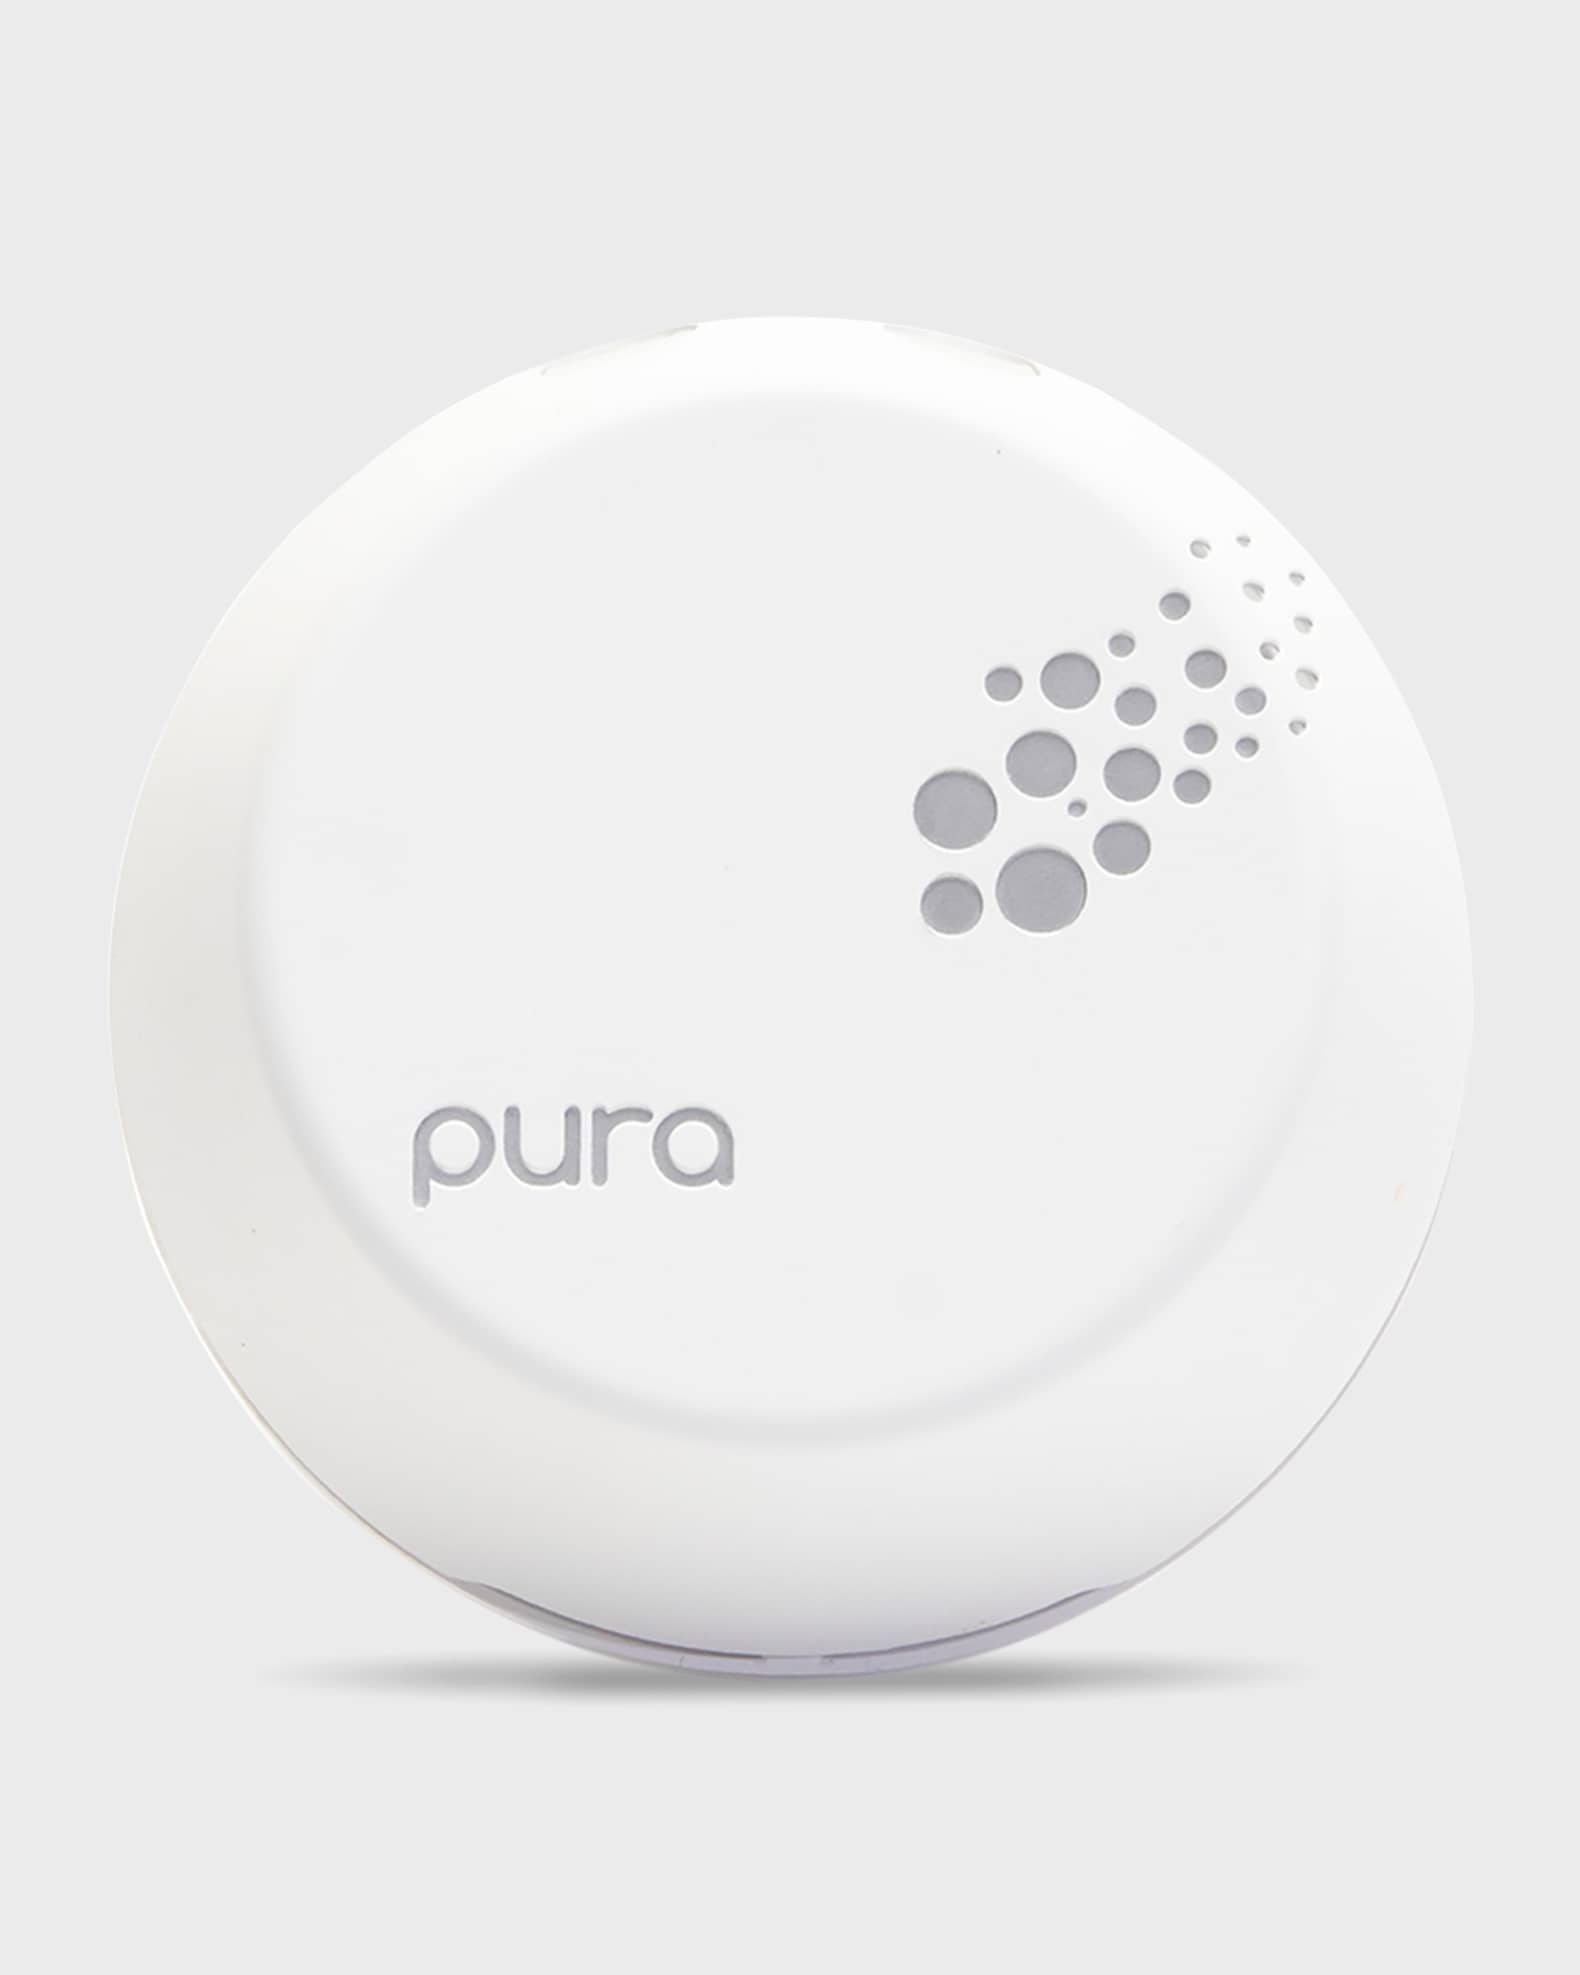 Pura on Instagram: From Pura 3 to Pura 4, we have reimagined our